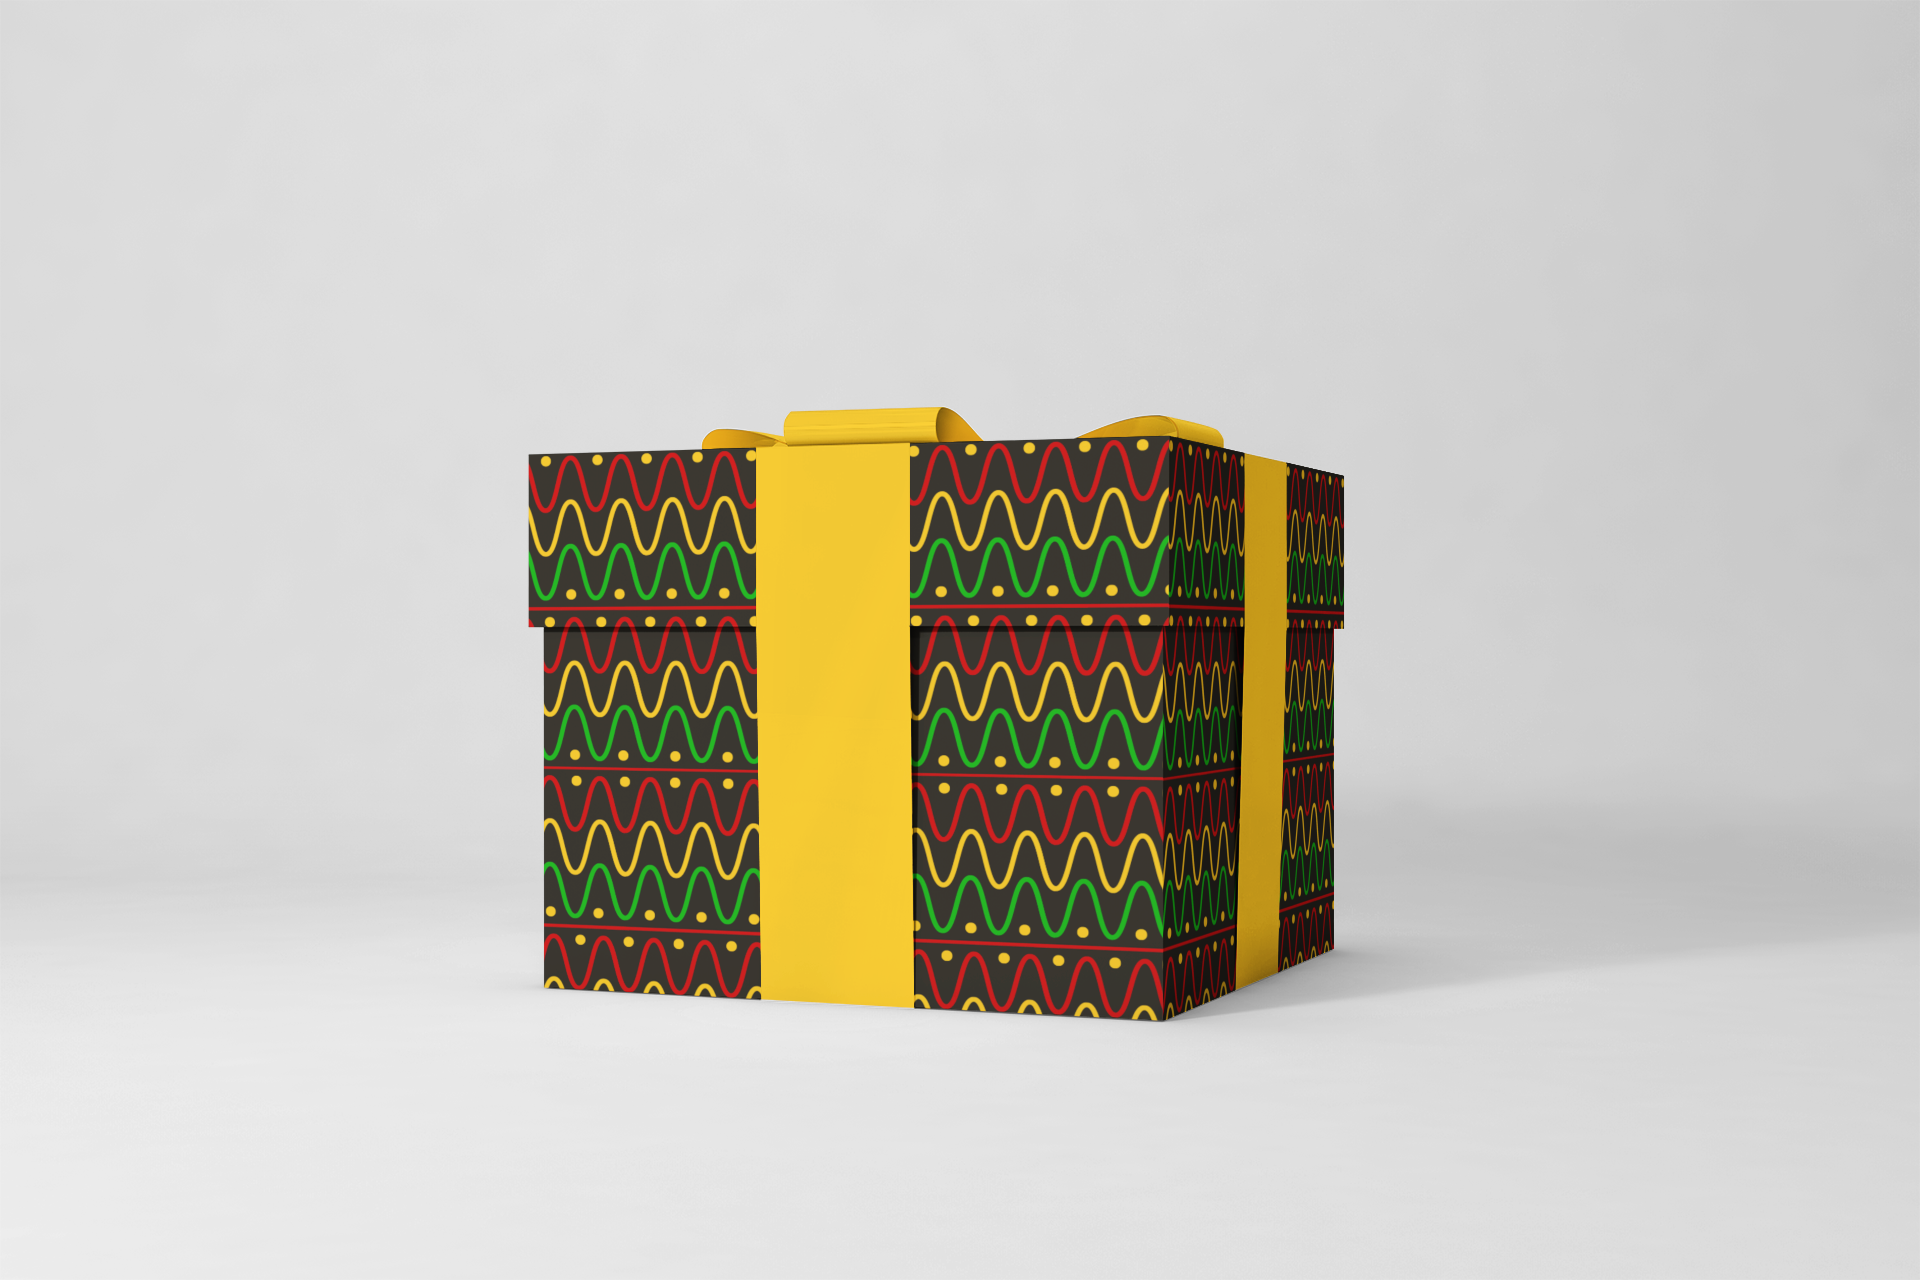 Kwanzaa Wrapping Paper Authentic African American Heritage Gift